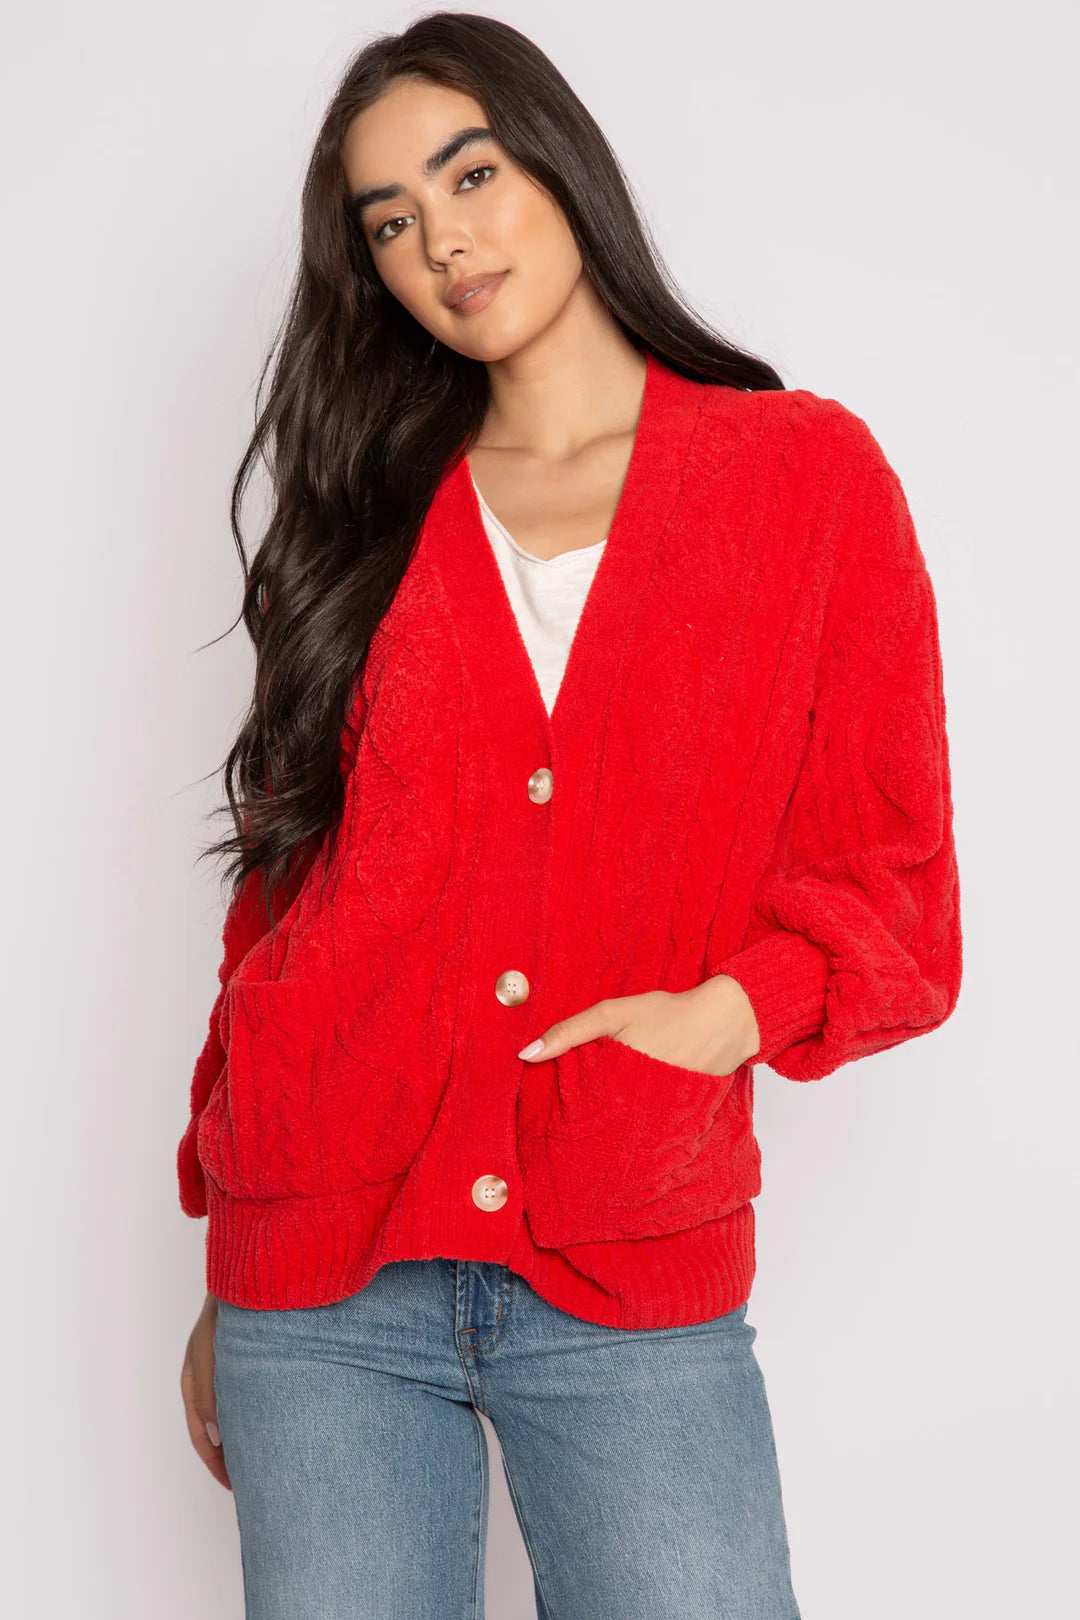 P.J. Salvage Forever Festive Cardigan - Red